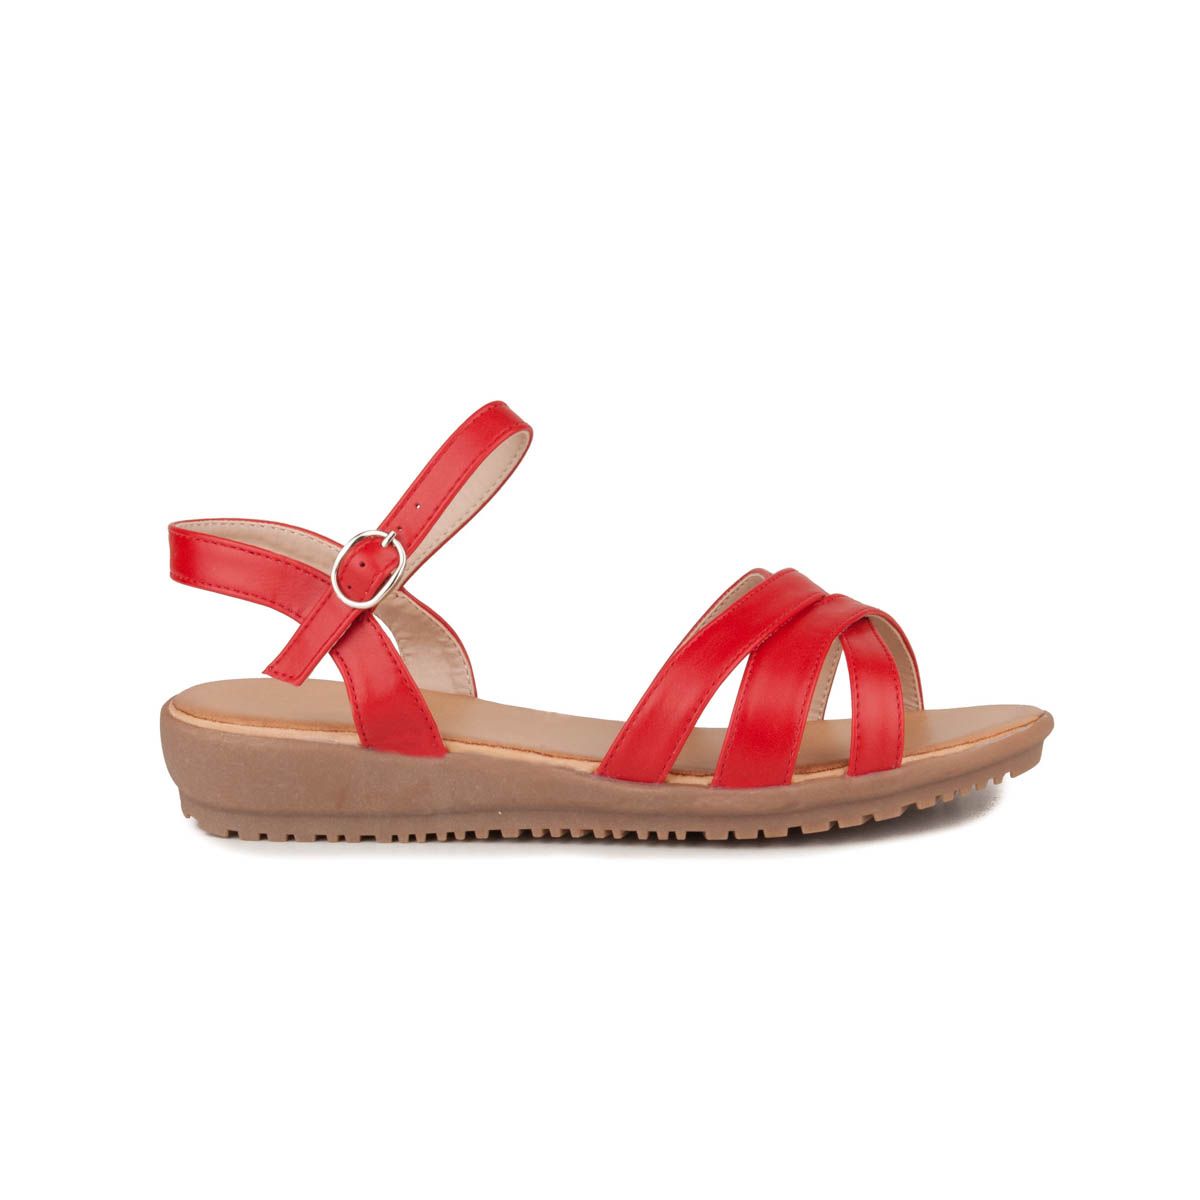 The comeding is a basic but perfect sandala for the day by day thanks to its comfort and low wedge. Manufactured in easy-to-clean material and with padded template. Adjust perfectly thanks to its buckle and elastic closure. Height heel 3 cm and wedge of 1.5 cm.